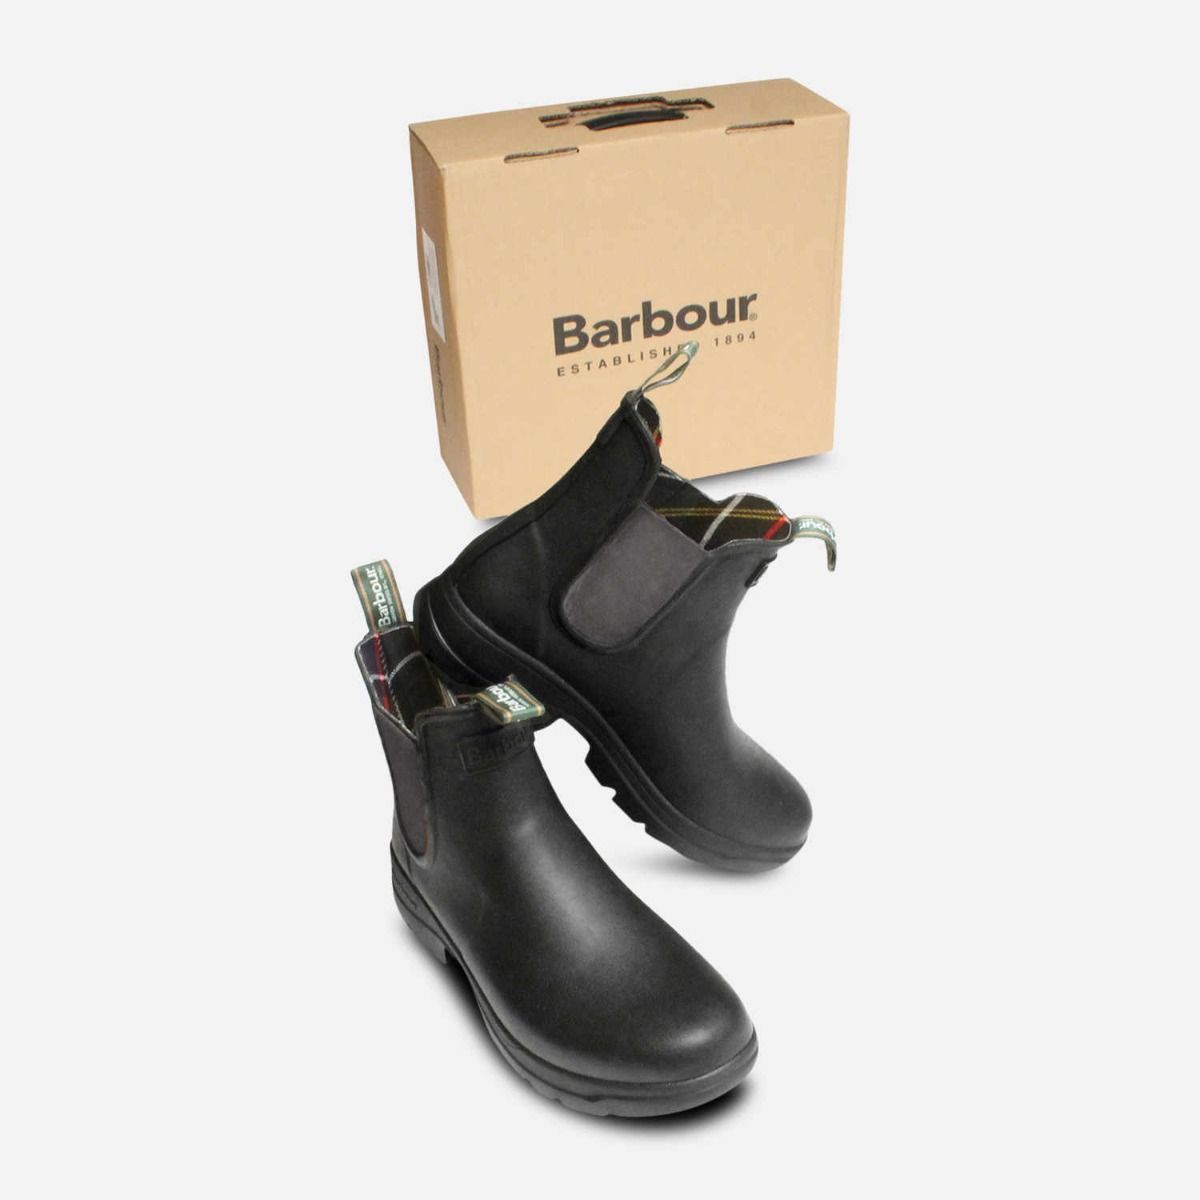 mens barbour wellies size 9